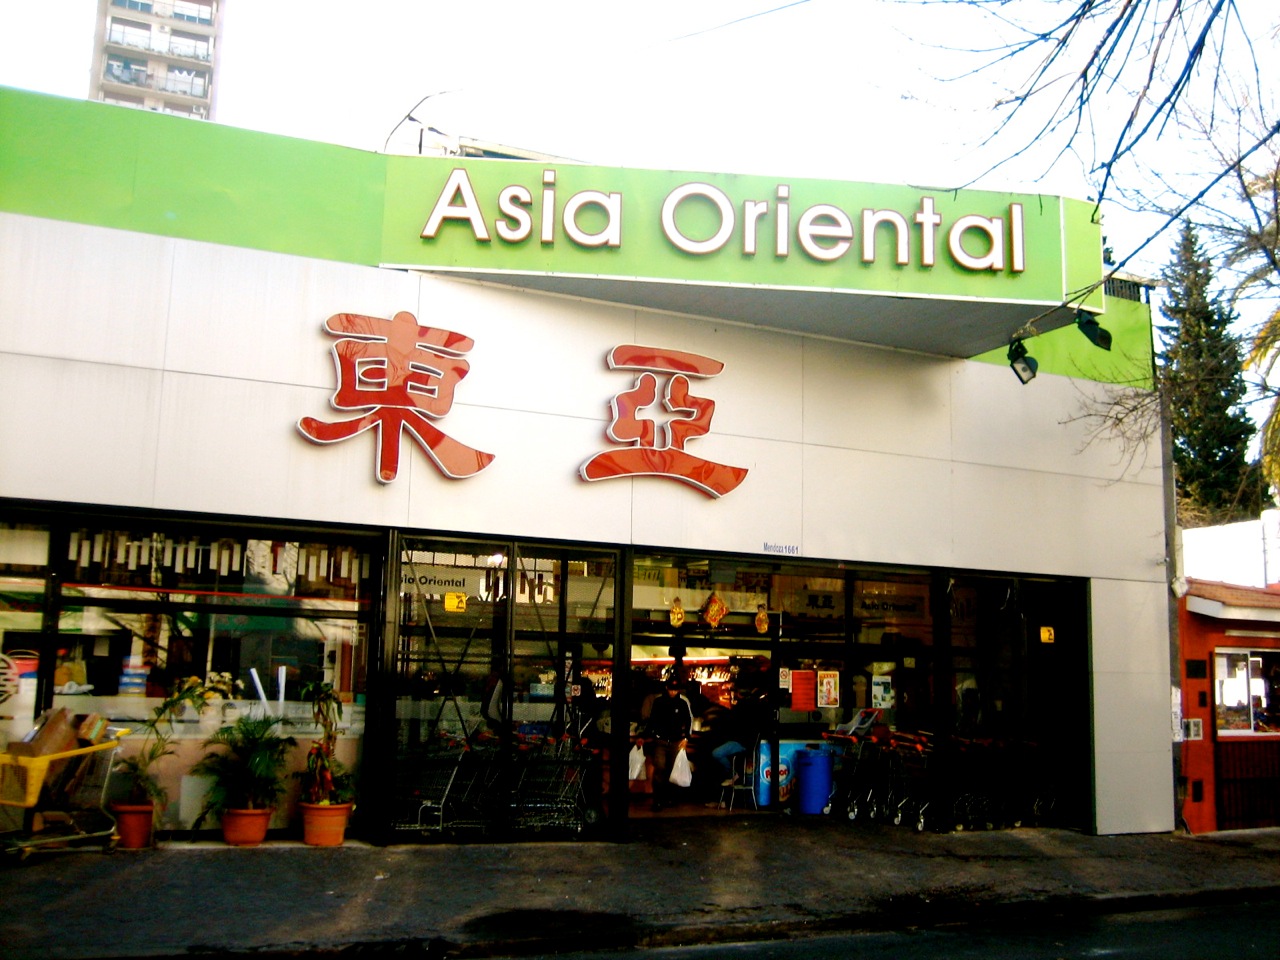 The Chinese Food Counter: Asia Oriental Supermarket in Barrio Chino